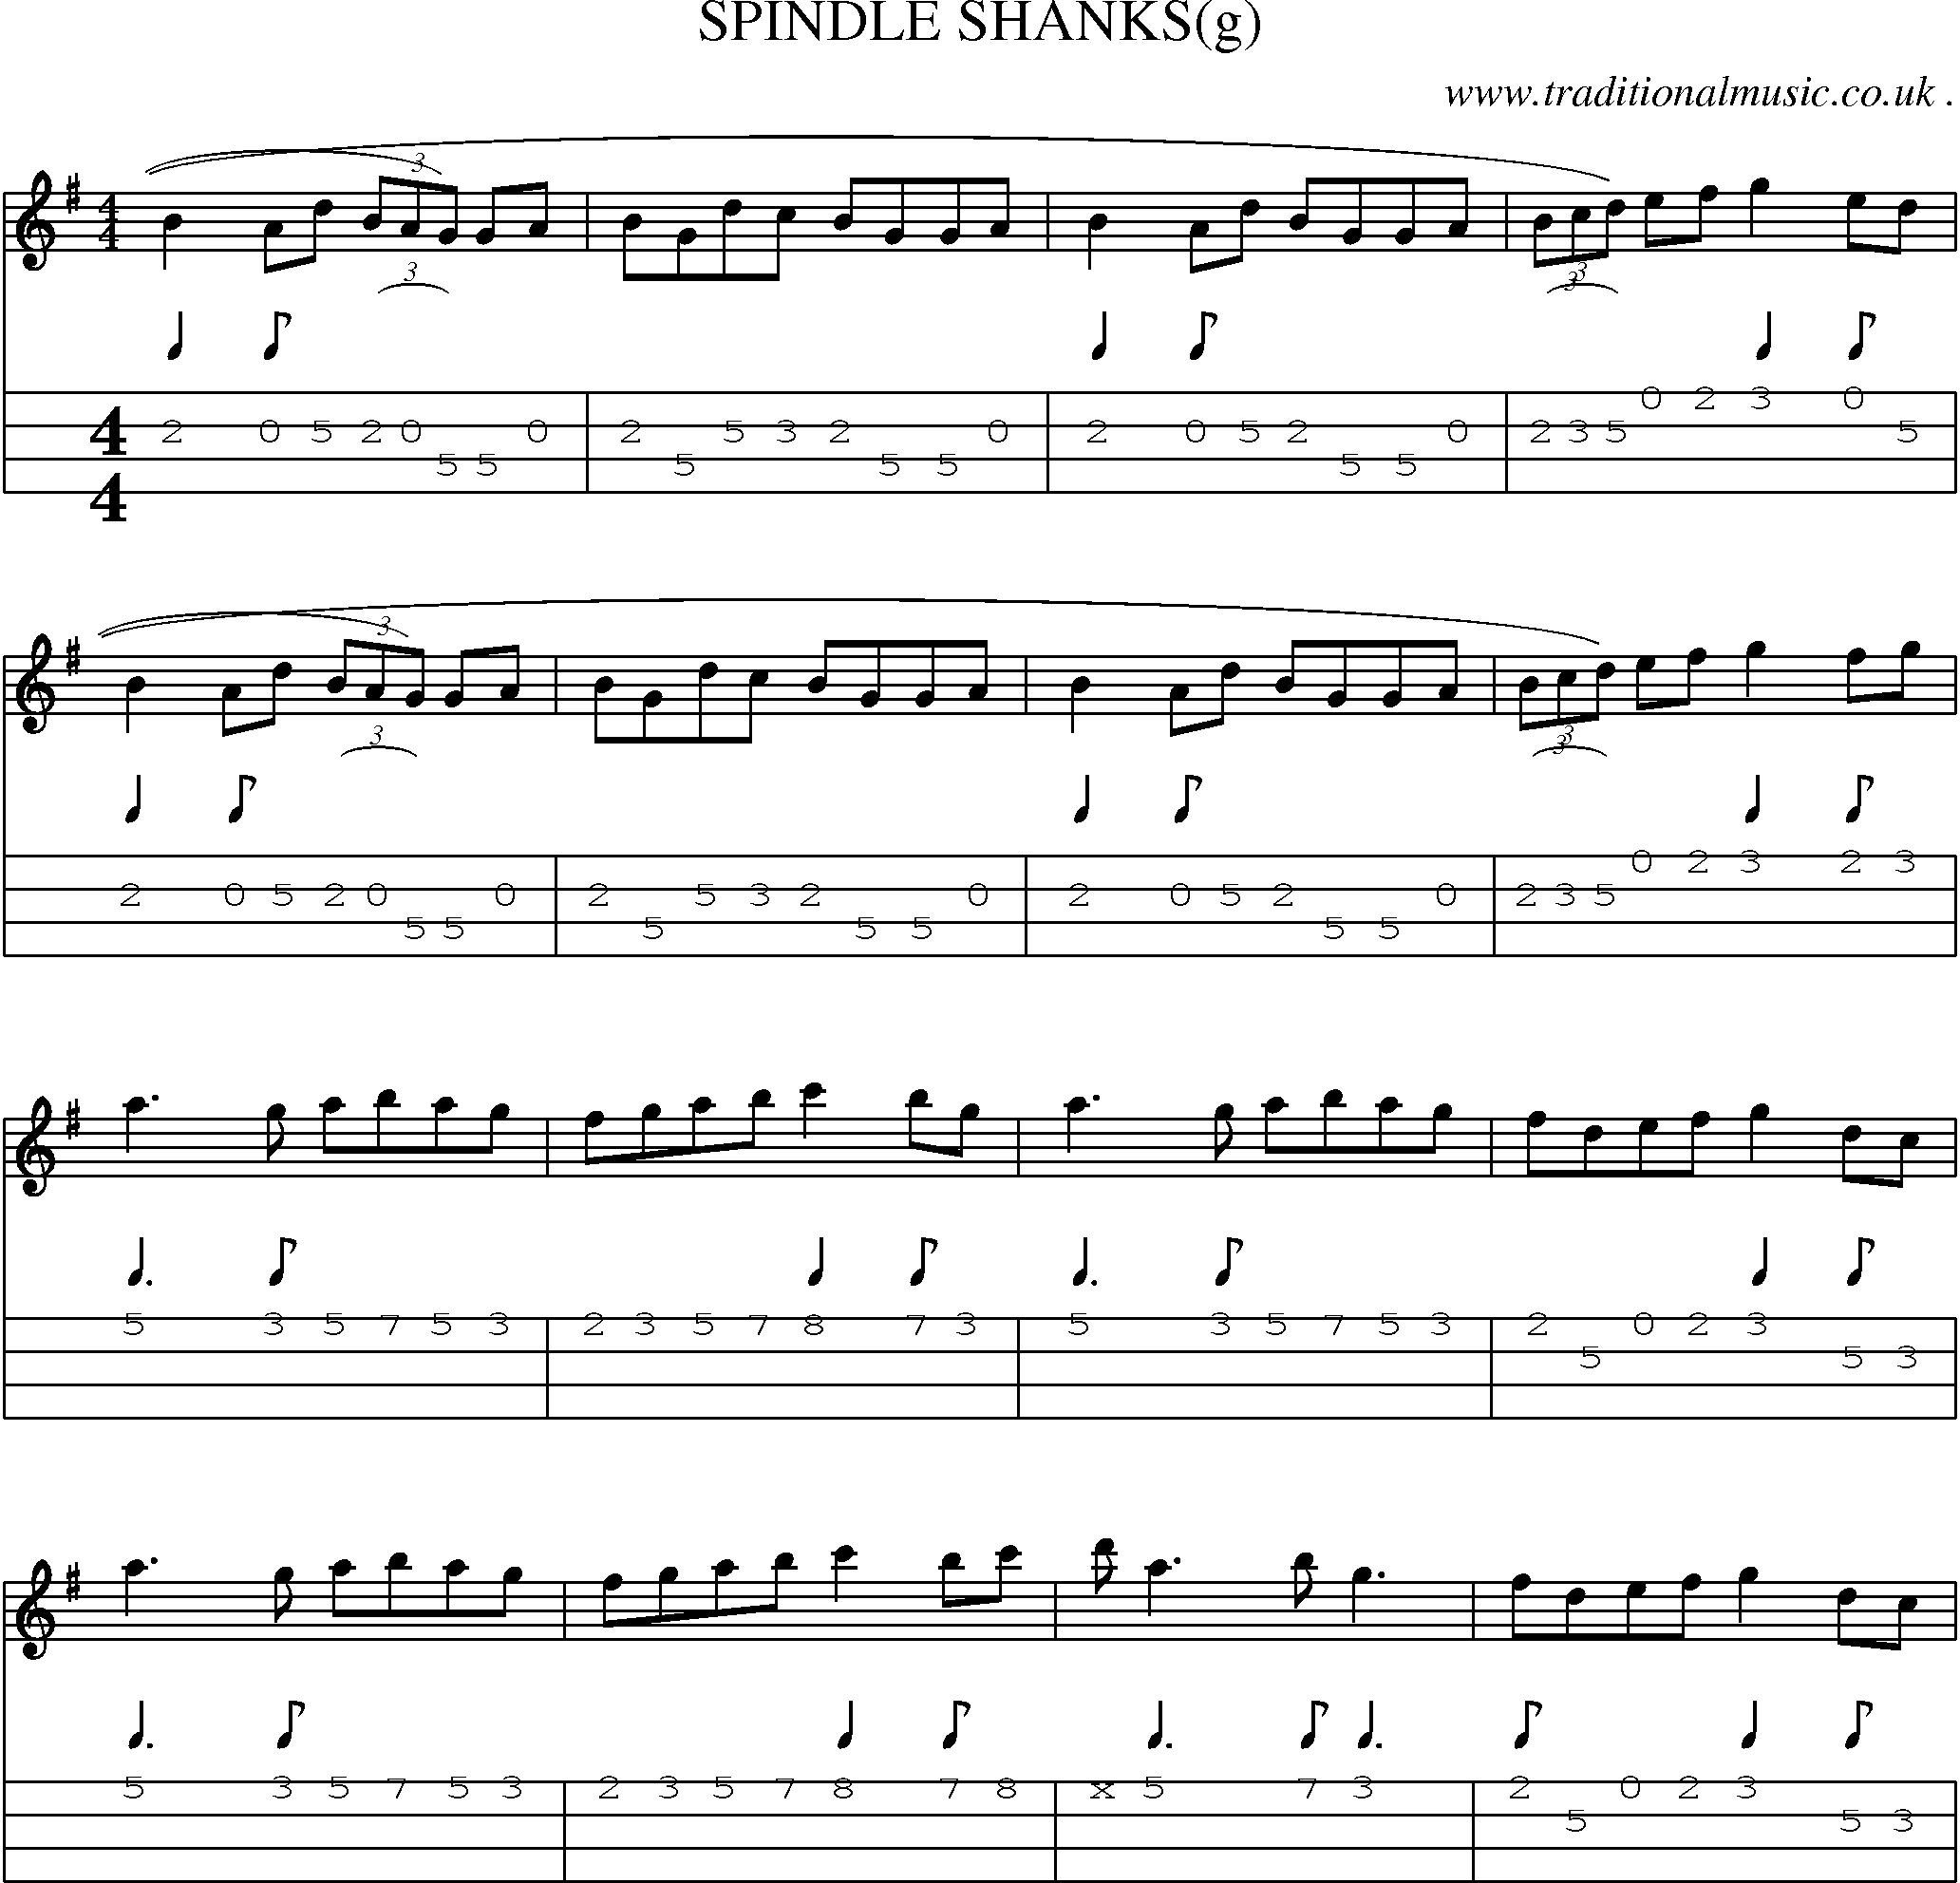 Sheet-Music and Mandolin Tabs for Spindle Shanks(g)